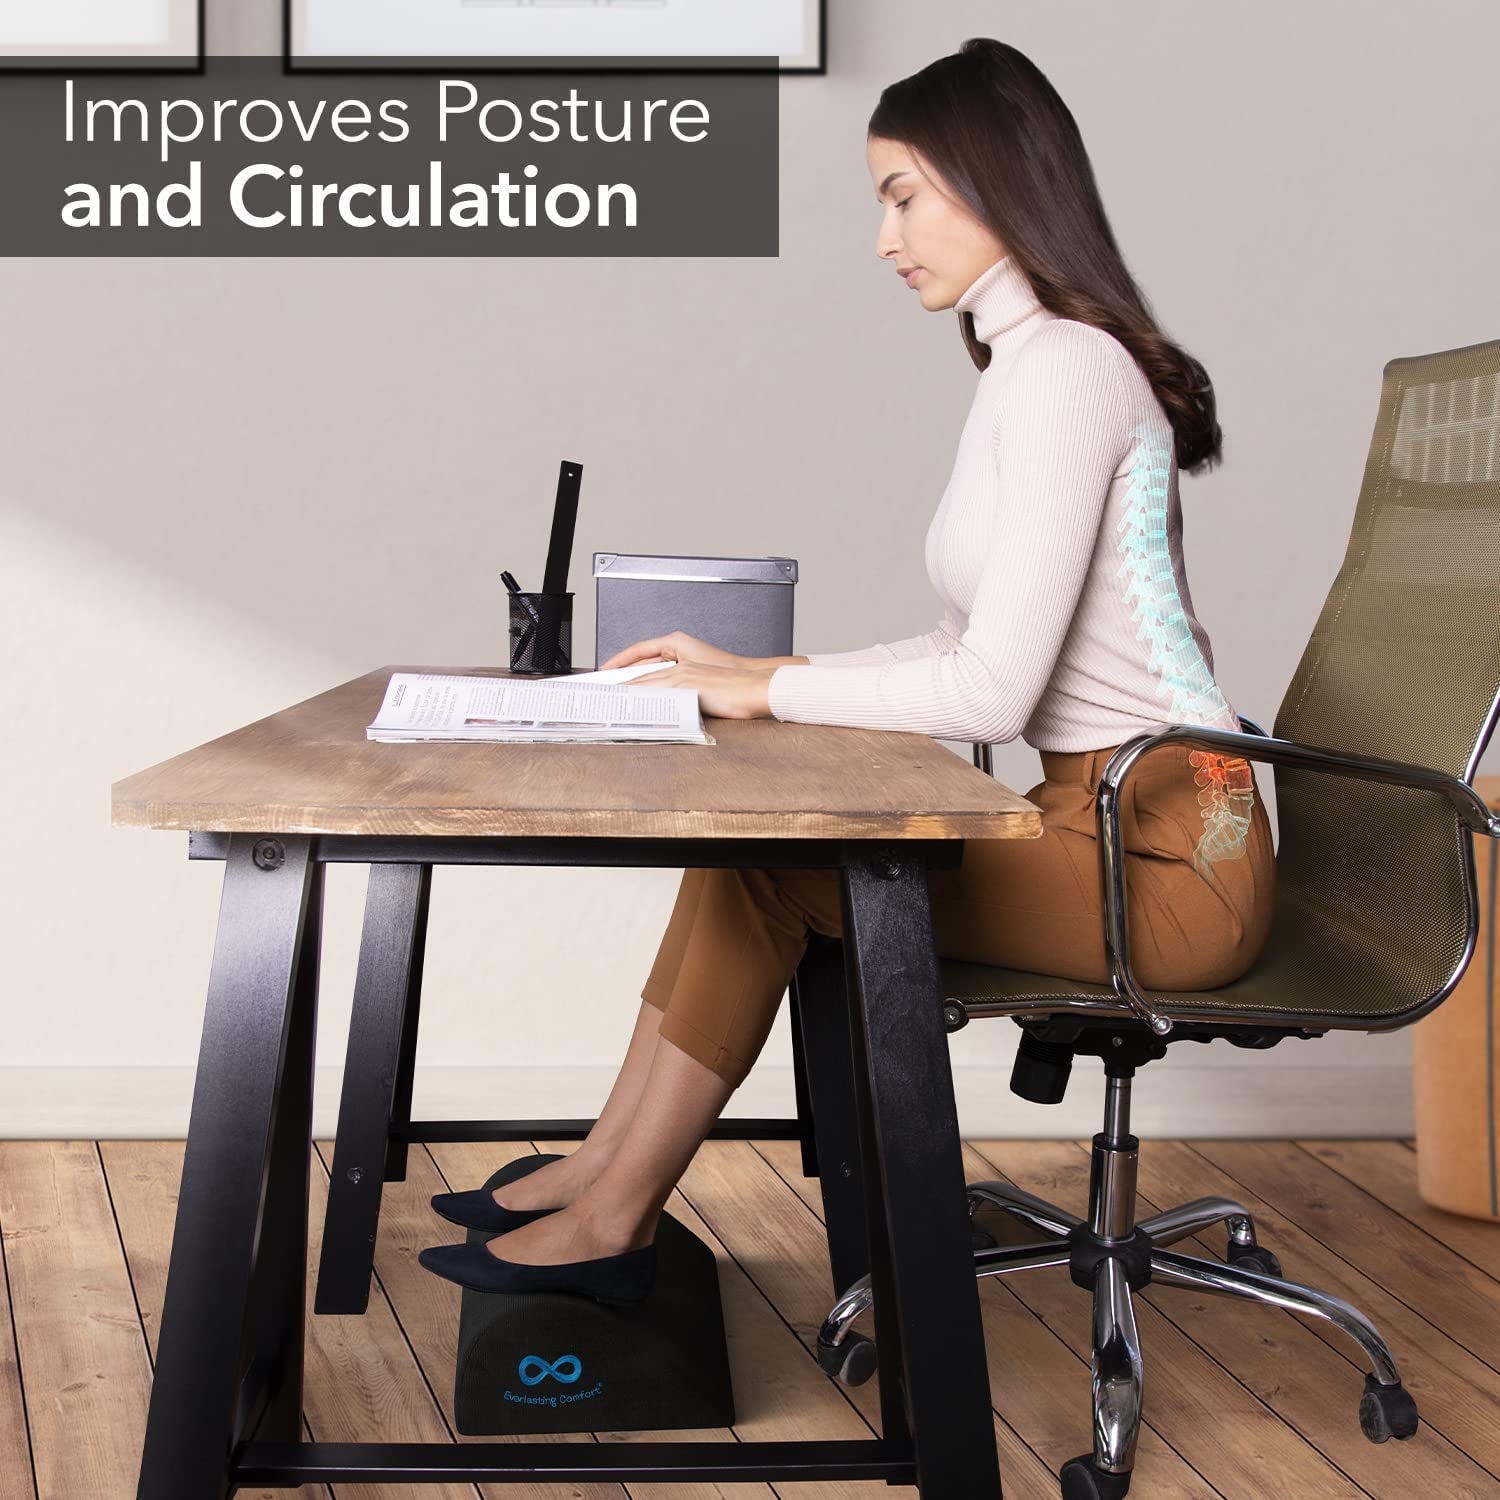 Ergonomic Foot Rest for Under Desk at Work with - Provides All-Day Support and Pain Relief - Ideal for Home Office, Gaming, and More